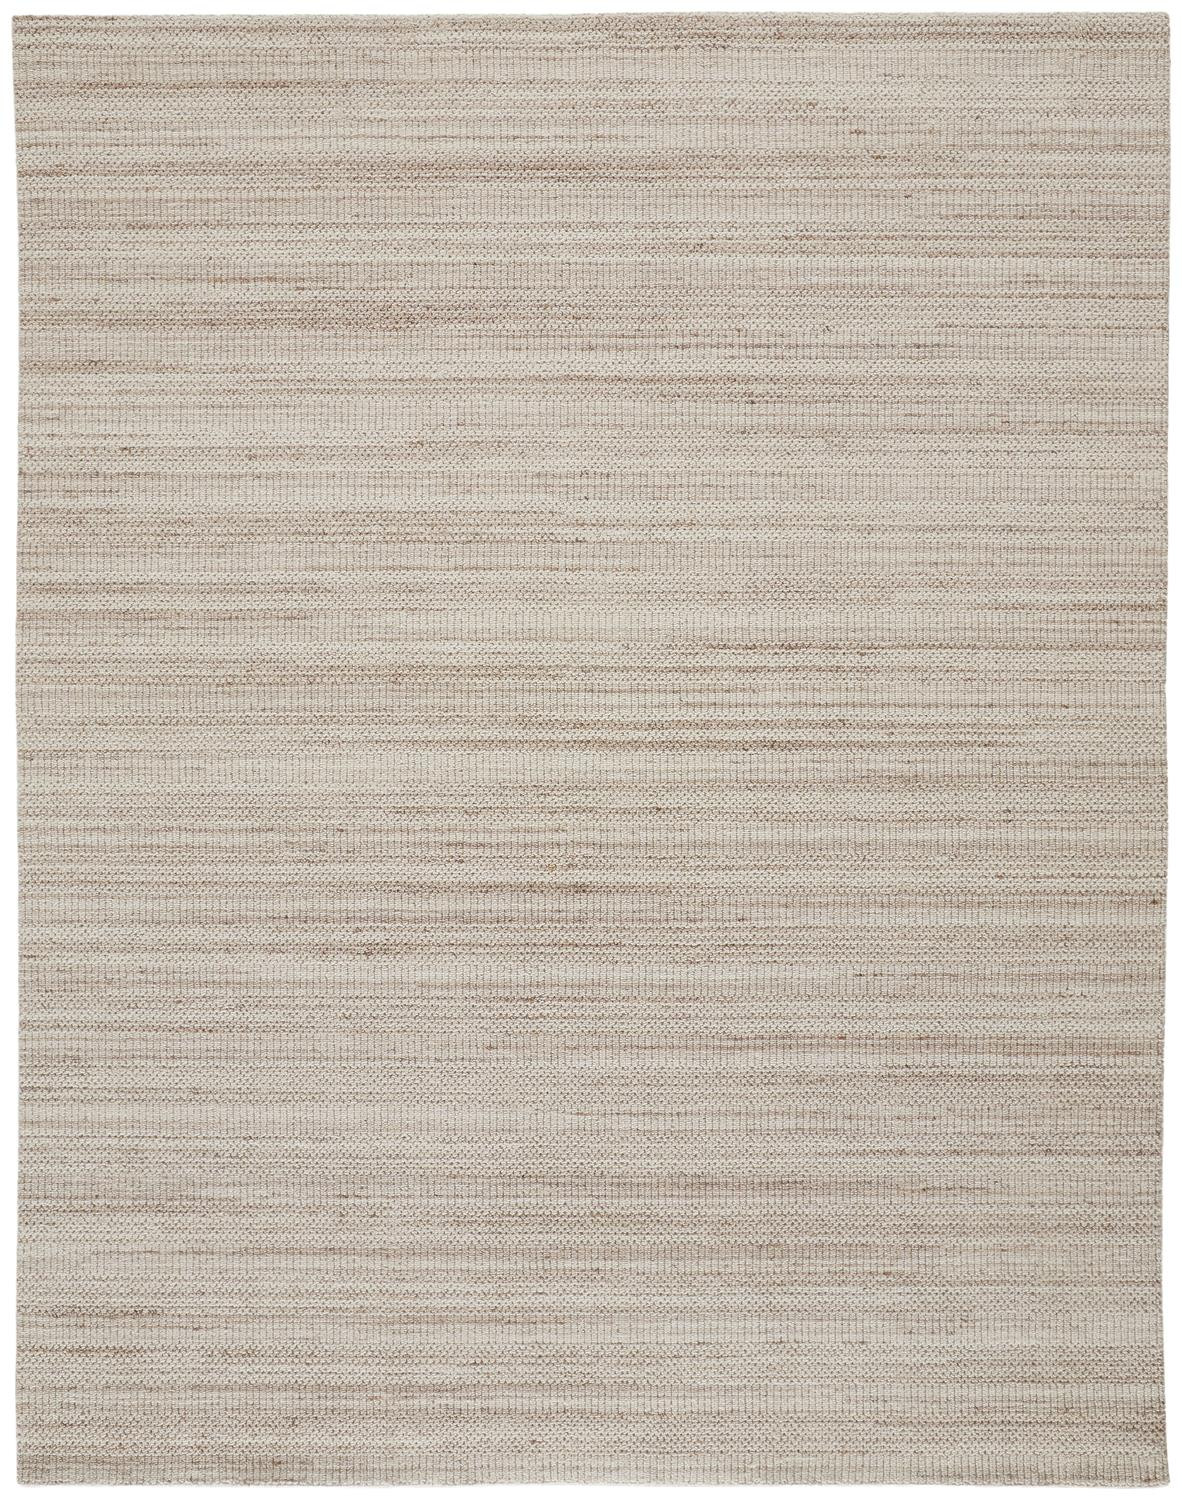 10' X 14' Ivory Wool Hand Woven Stain Resistant Area Rug-514042-1